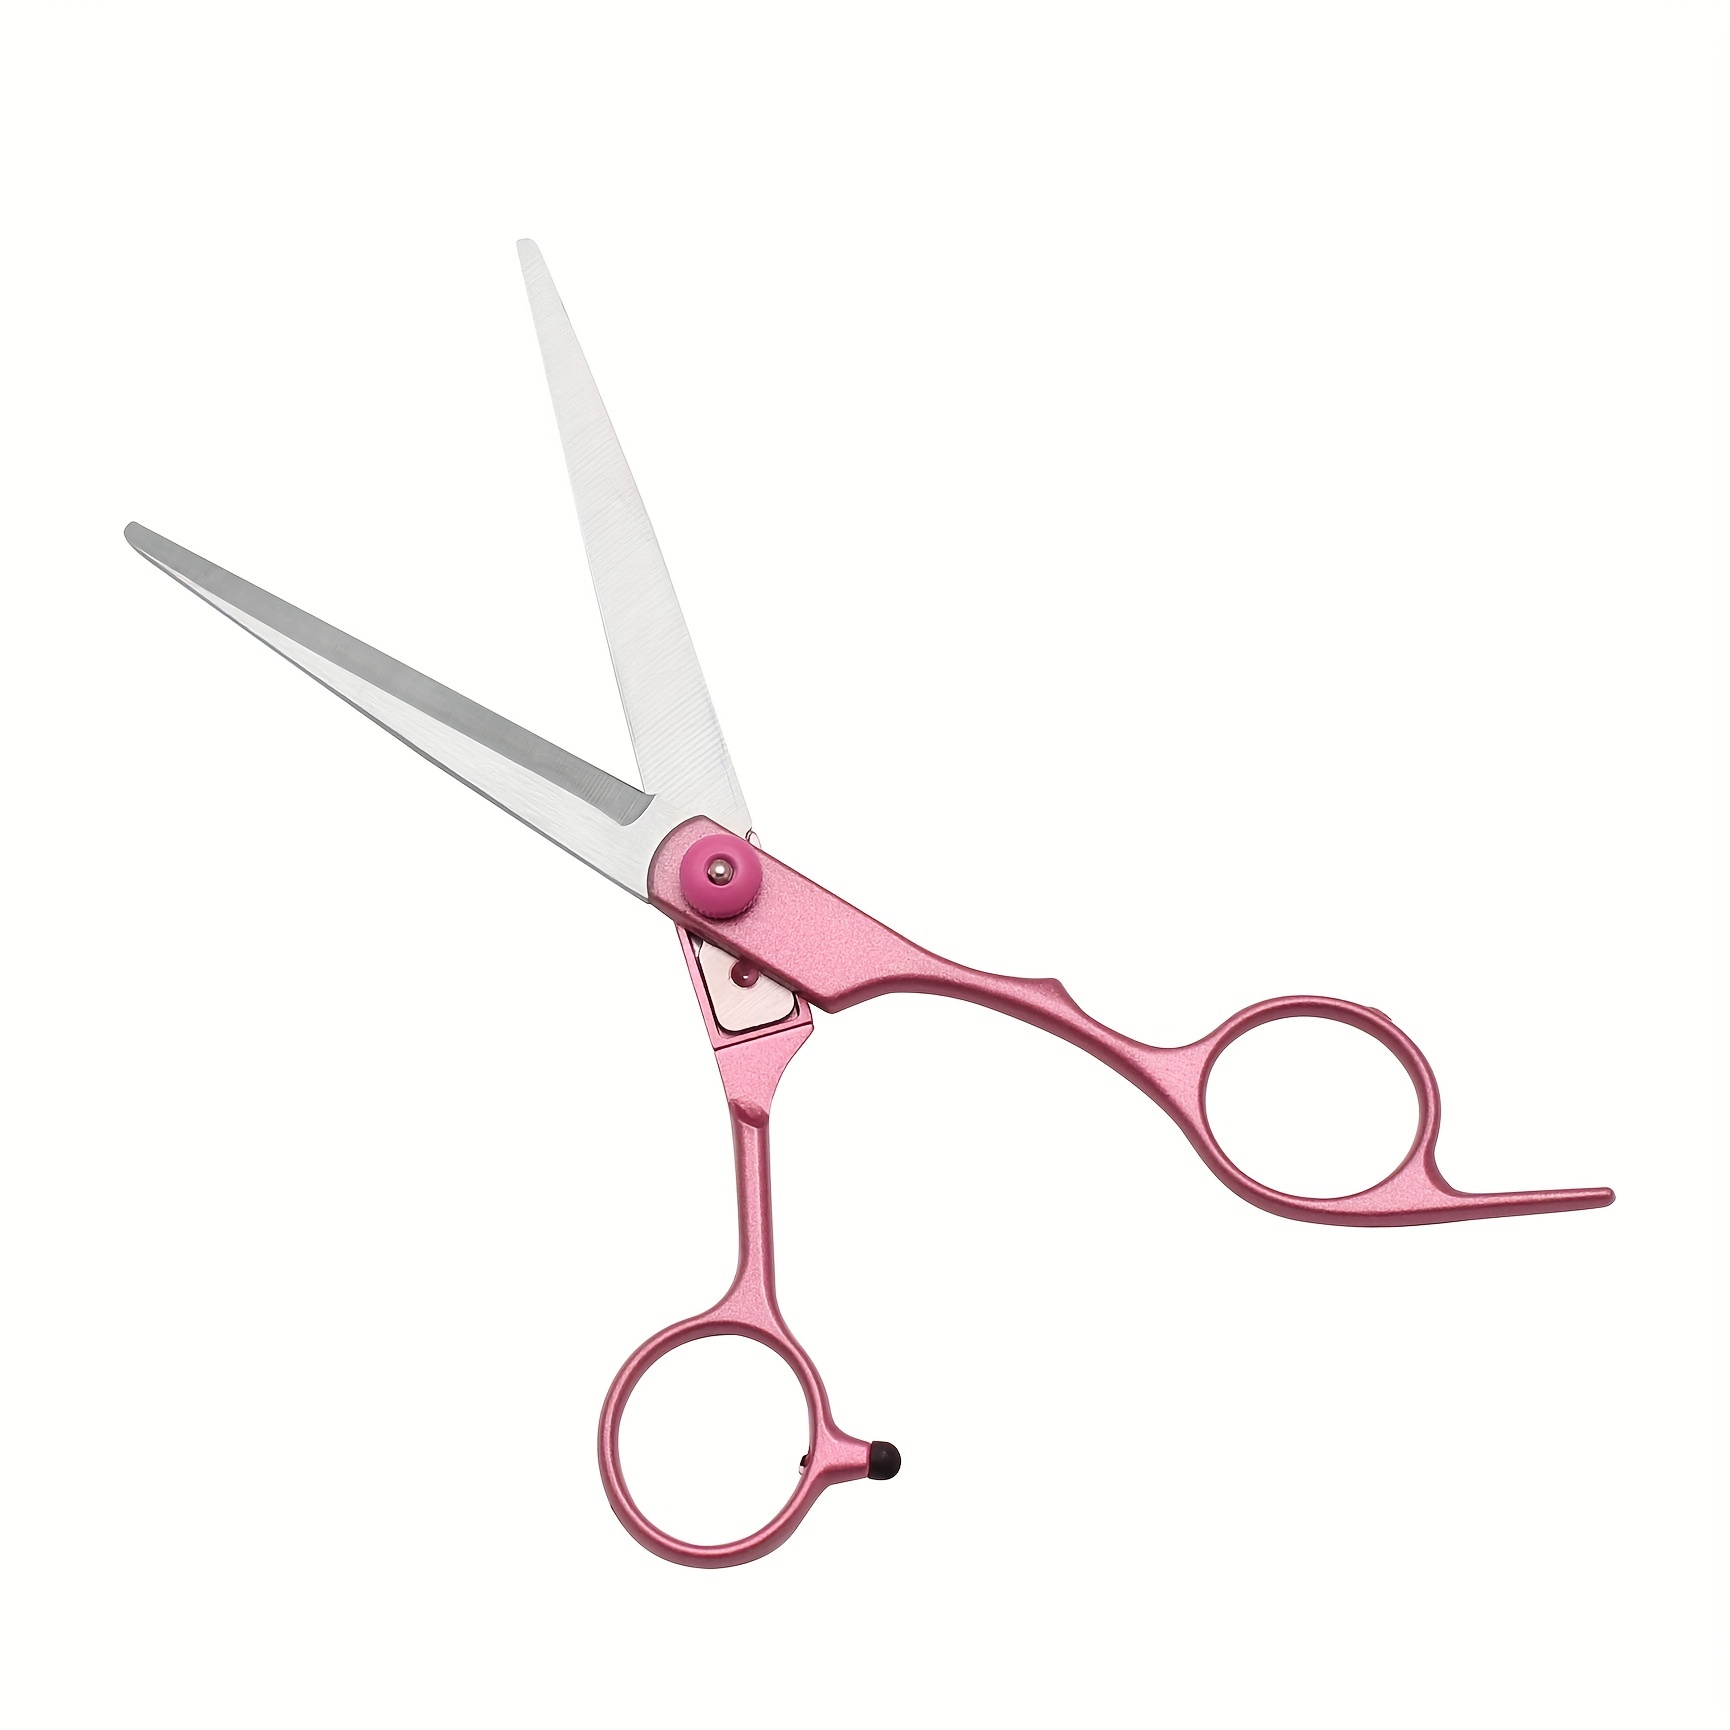 1pc Professional Hair Scissors - Stainless Steel Hair Cutting